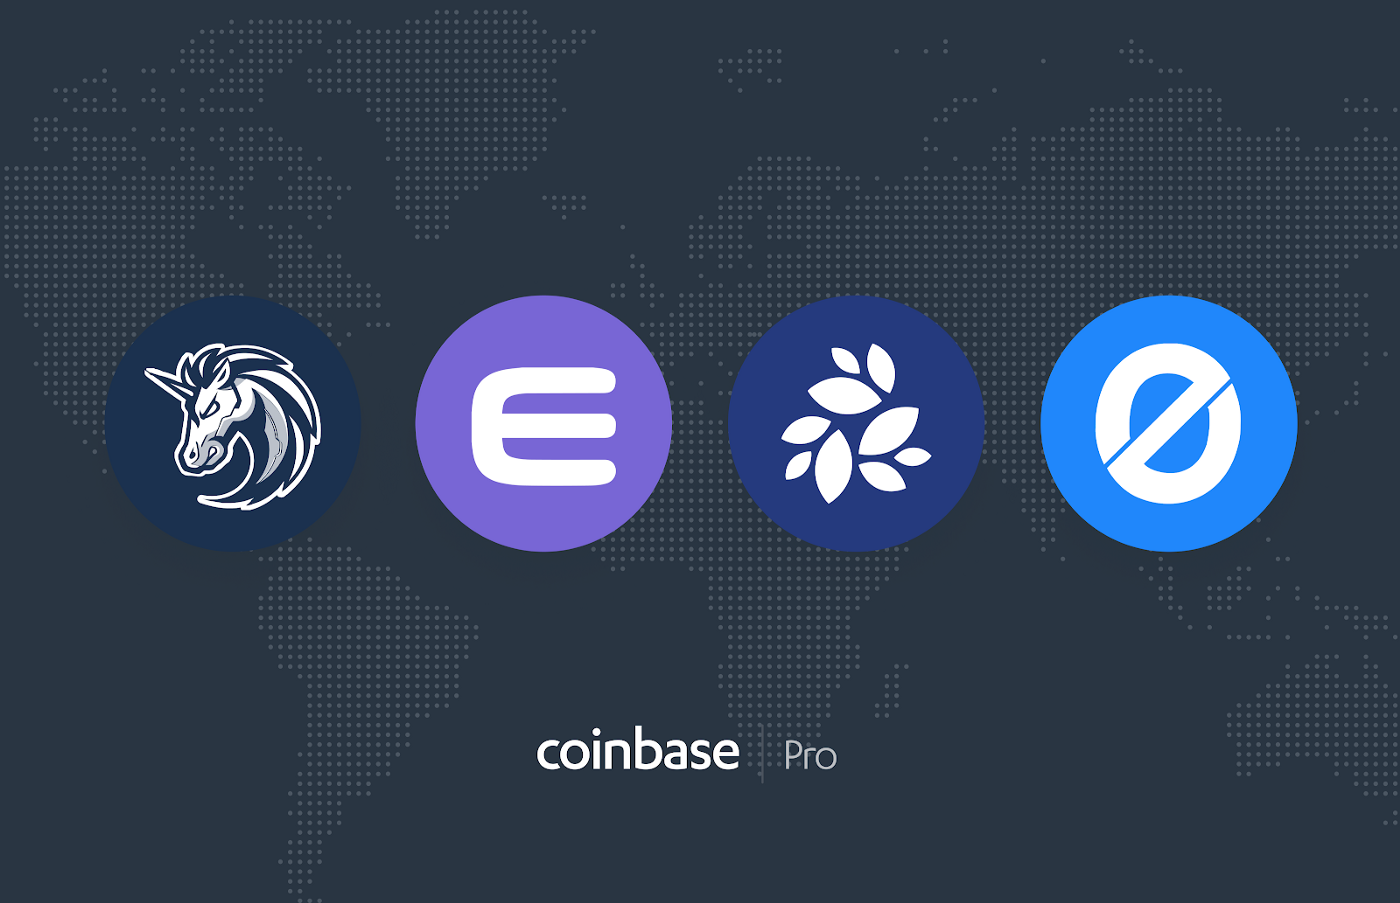 1inch (1INCH), Enjin Coin (ENJ), NKN (NKN) and Origin Token (OGN) are launching on Coinbase Pro